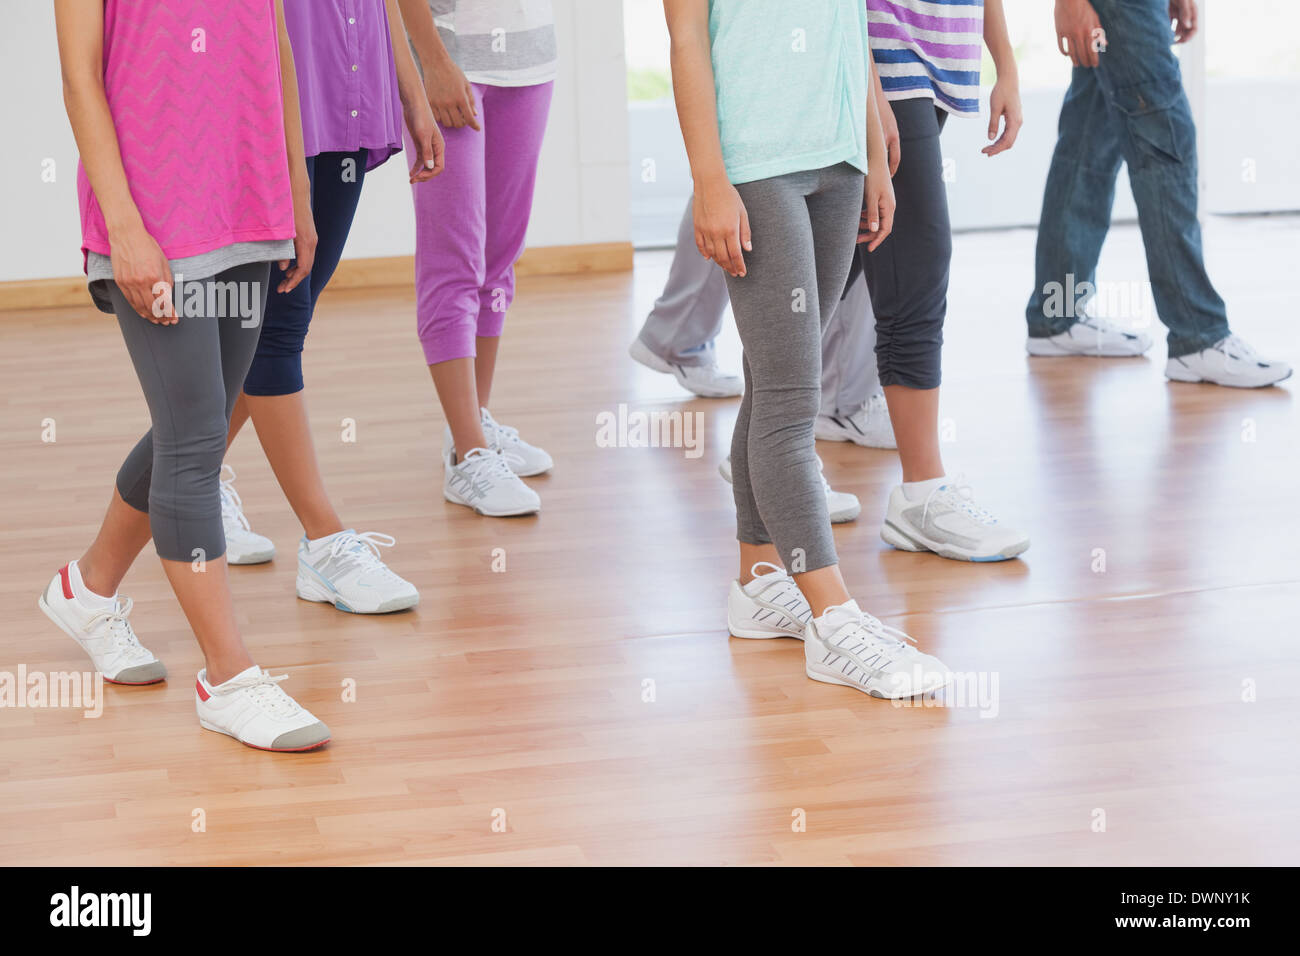 Low section of fitness class and instructor Stock Photo